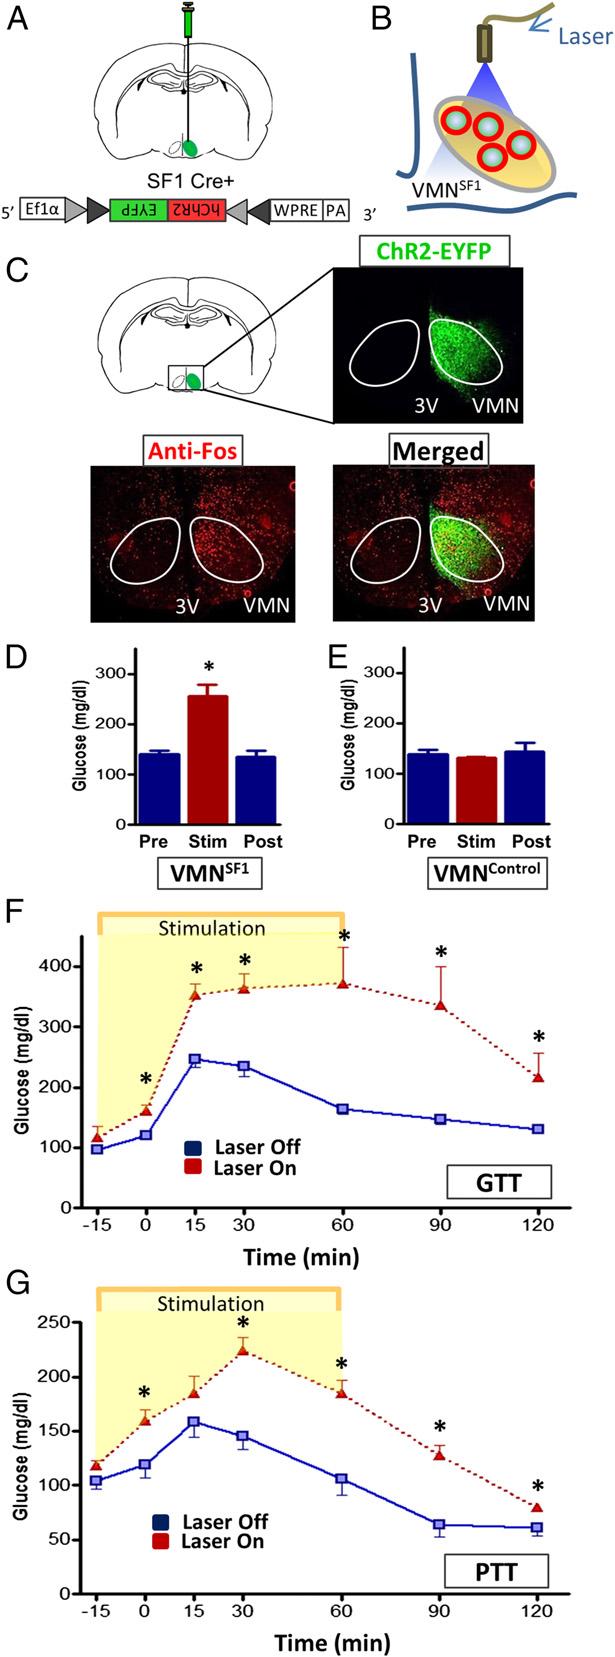 hypothesis, we expressed a light-activated excitatory channel selectively in VMN SF1 neurons through unilateral stereotaxic microinjection of a Cre-dependent, AAV-expressing channelrhodopsin-eyfp